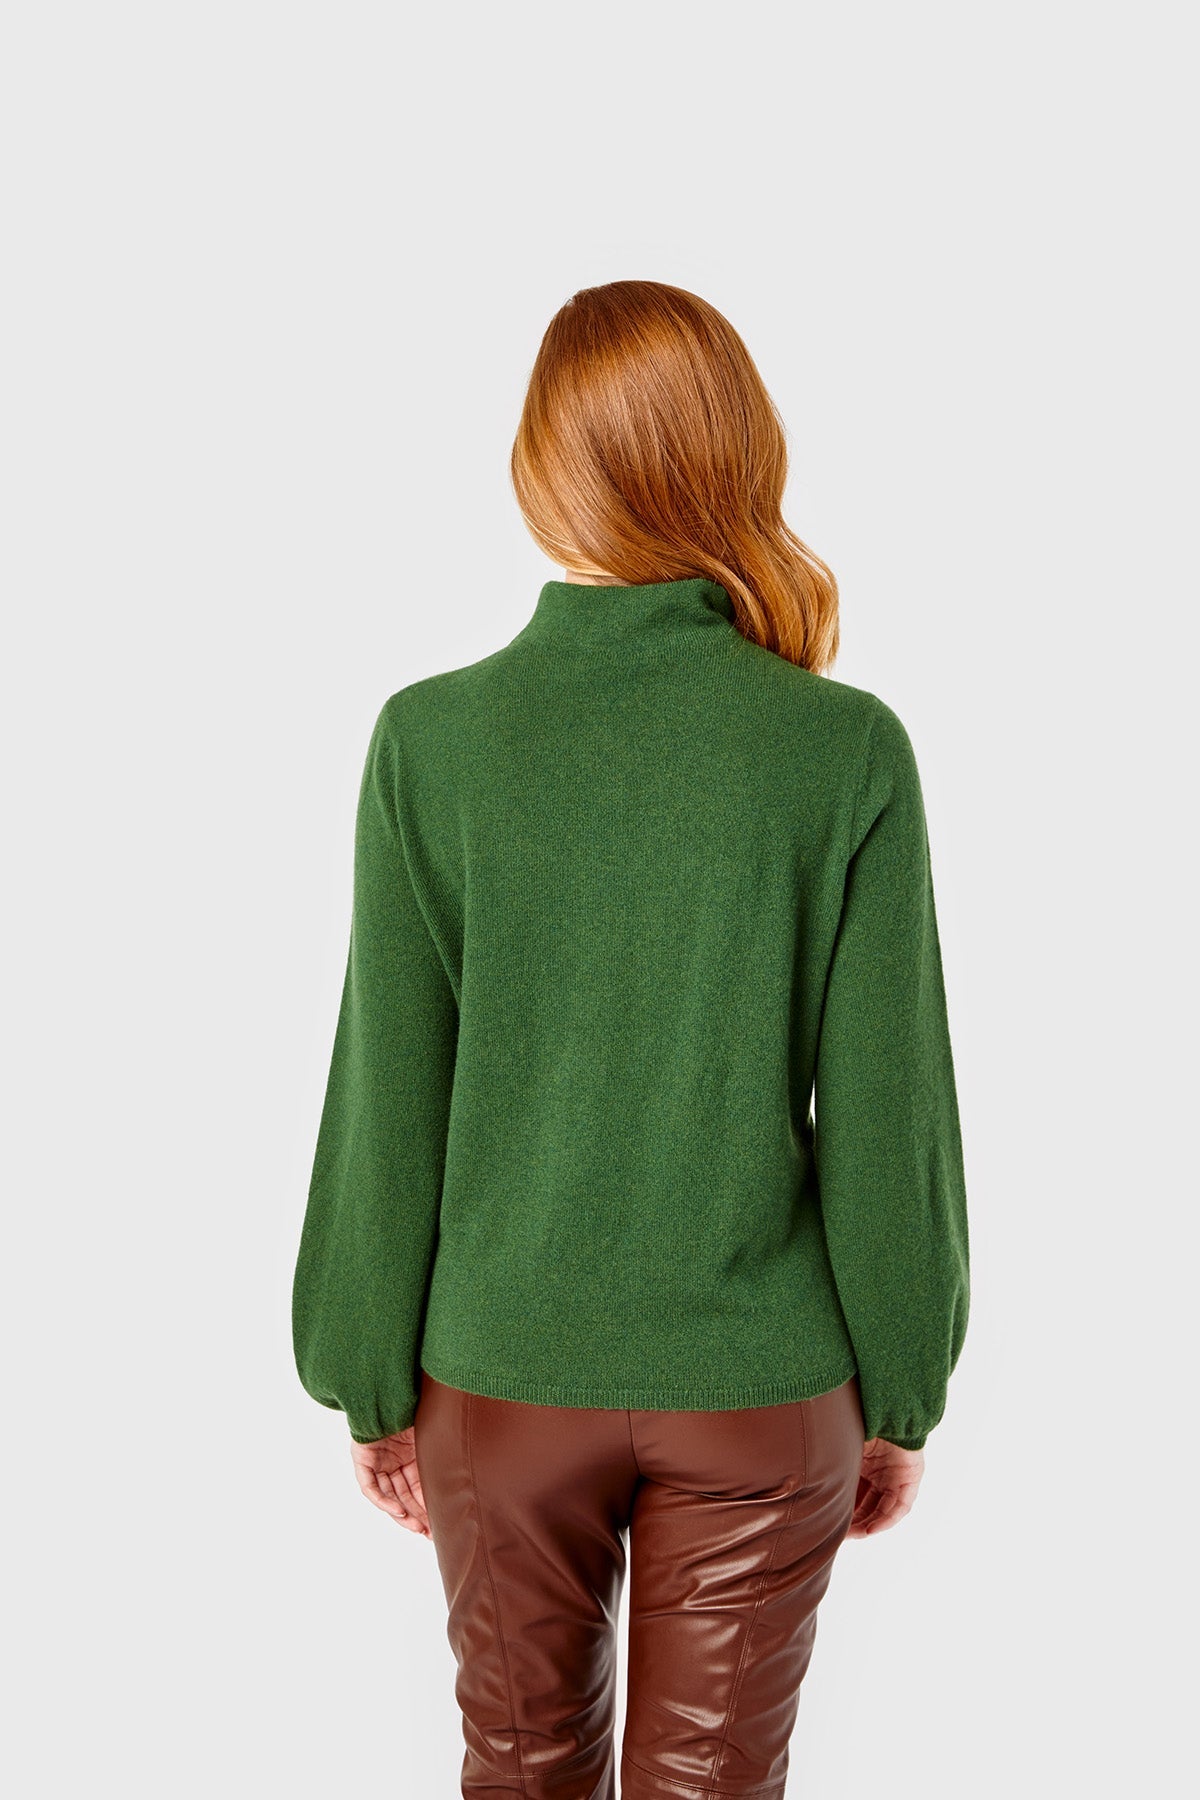 Willow Sweater-Cashmere-Olive by Cartolina